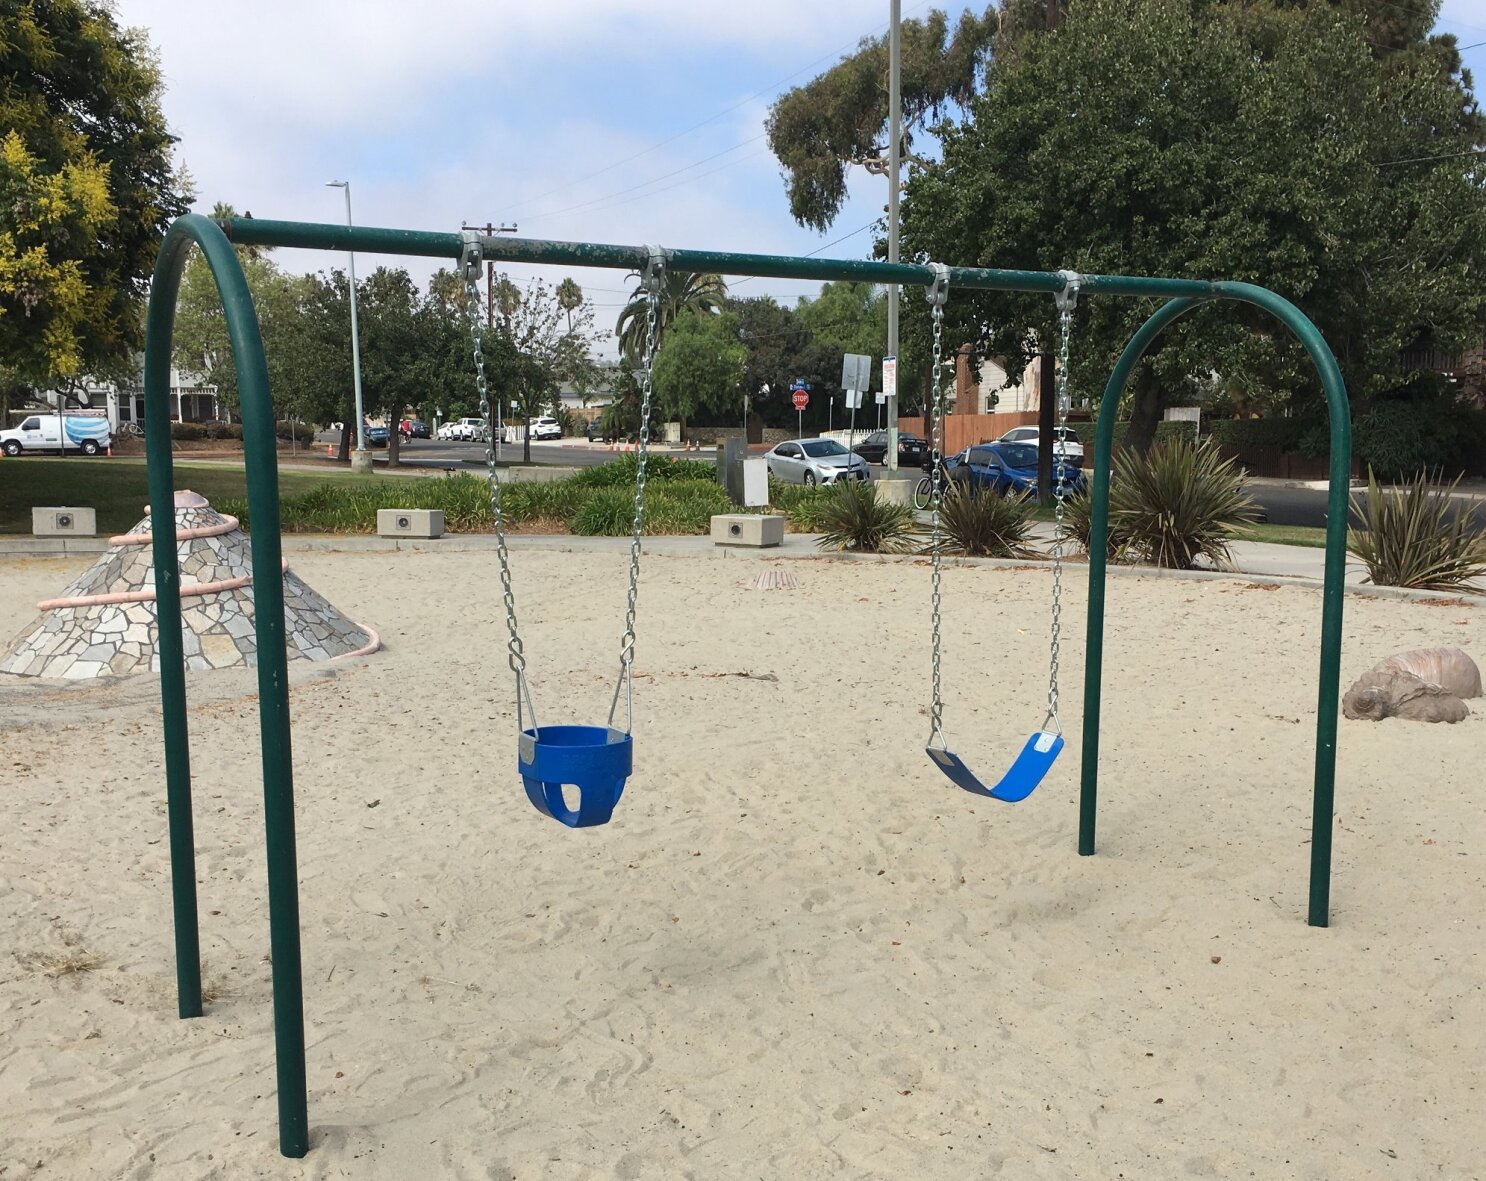 Park Curfews On The Rise In San Diego In Response To Crime Concerns The San Diego Union Tribune